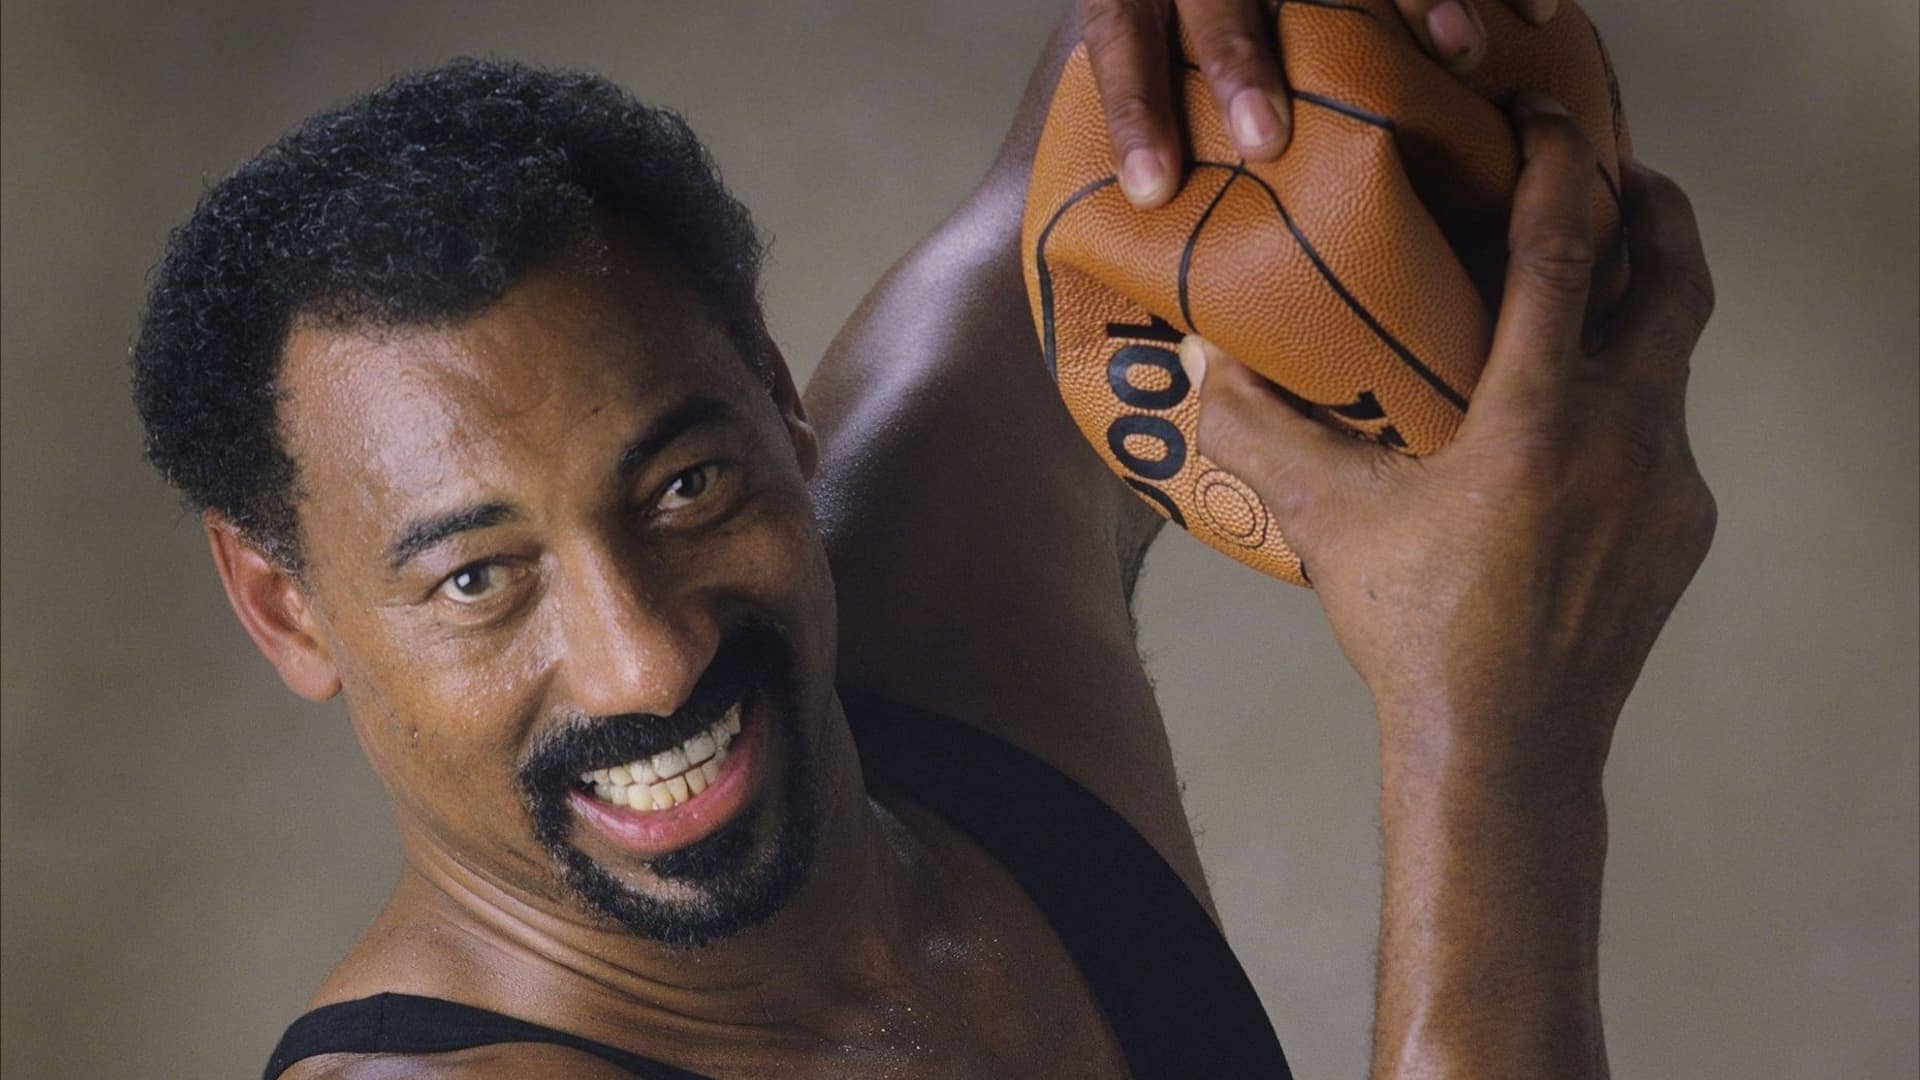 Top 20 NBA Career Scoring Leaders Of All Time In The World -  Wilt Chamberlain